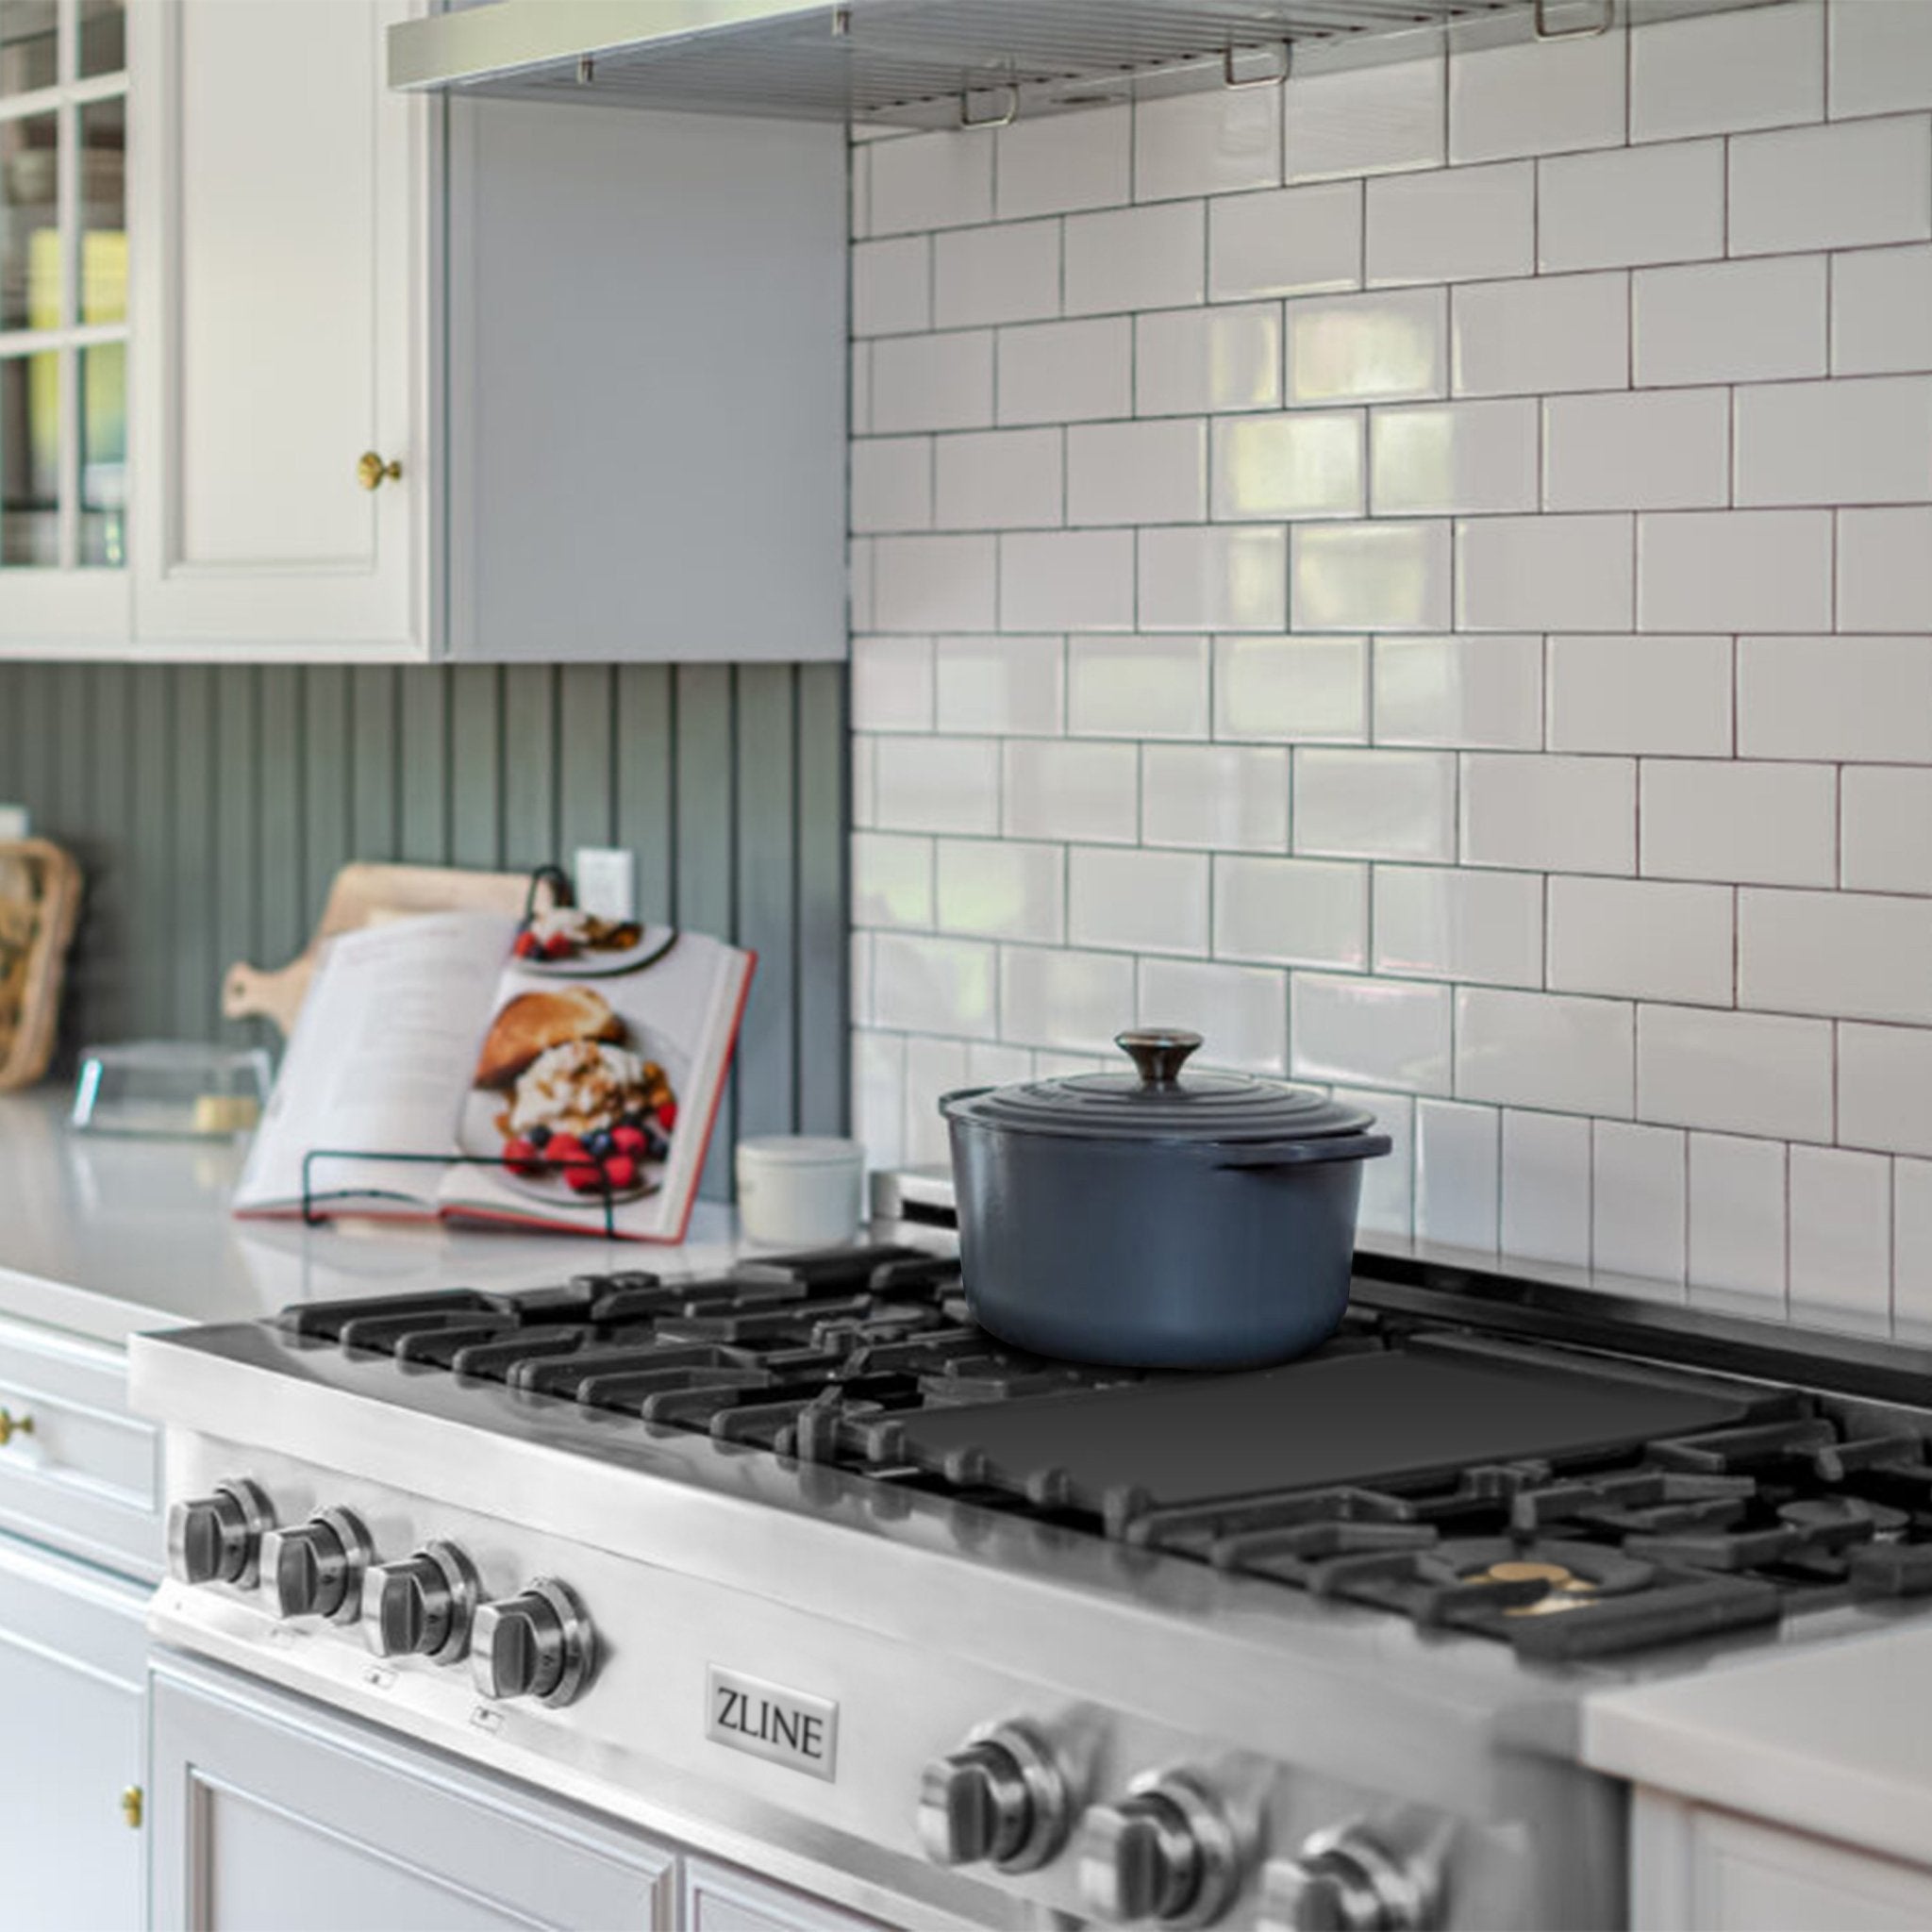 ZLINE 48" Porcelain Gas Stovetop with 7 Gas Burners and Griddle (RT48) Available with Brass Burners - Rustic Kitchen & Bath - Rangetops - ZLINE Kitchen and Bath